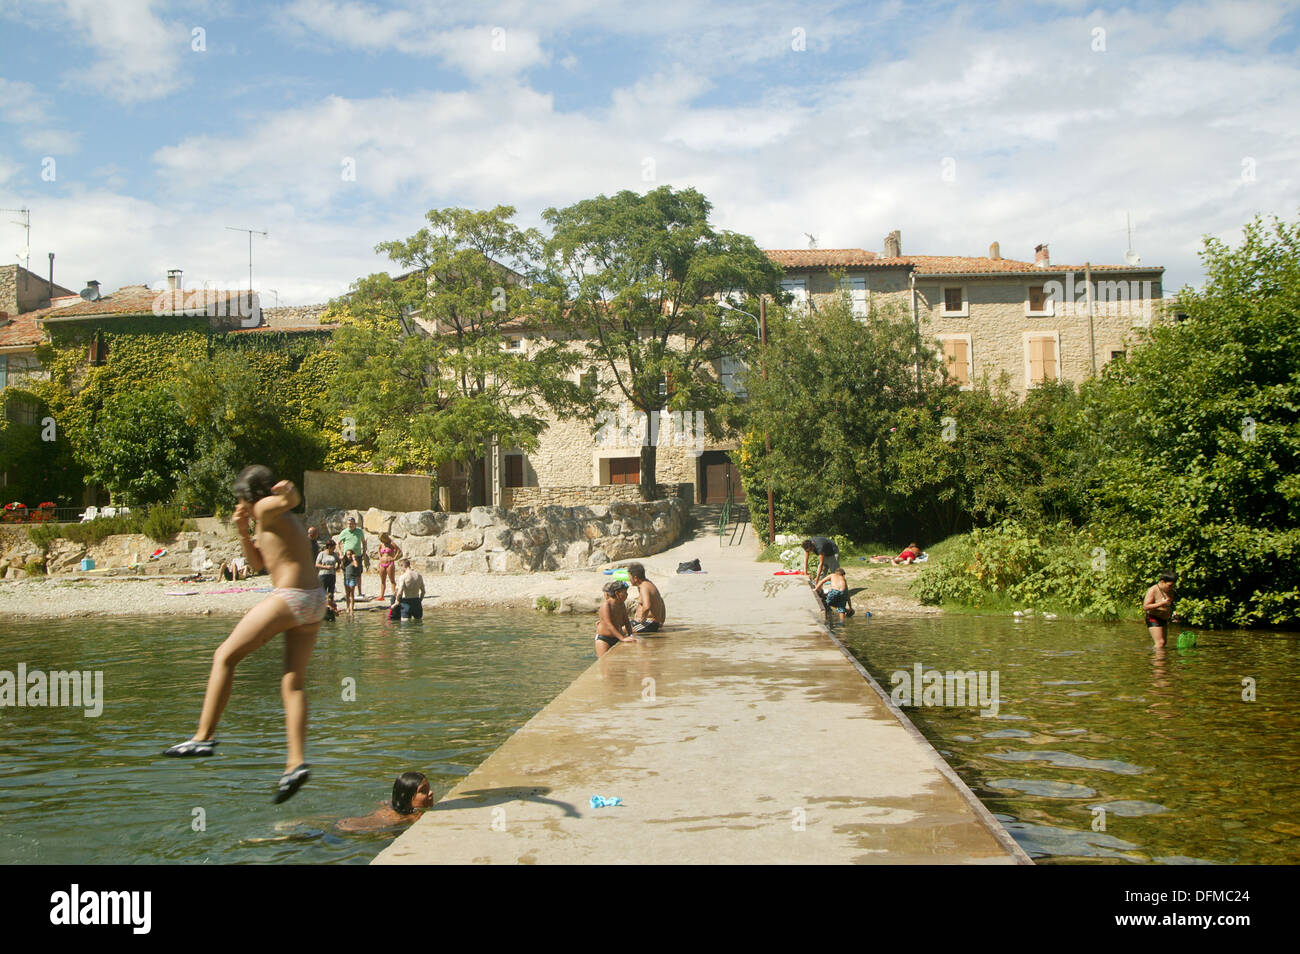 a hot summer day in rural France. a typical day in the life of a European child playing in the local river Stock Photo